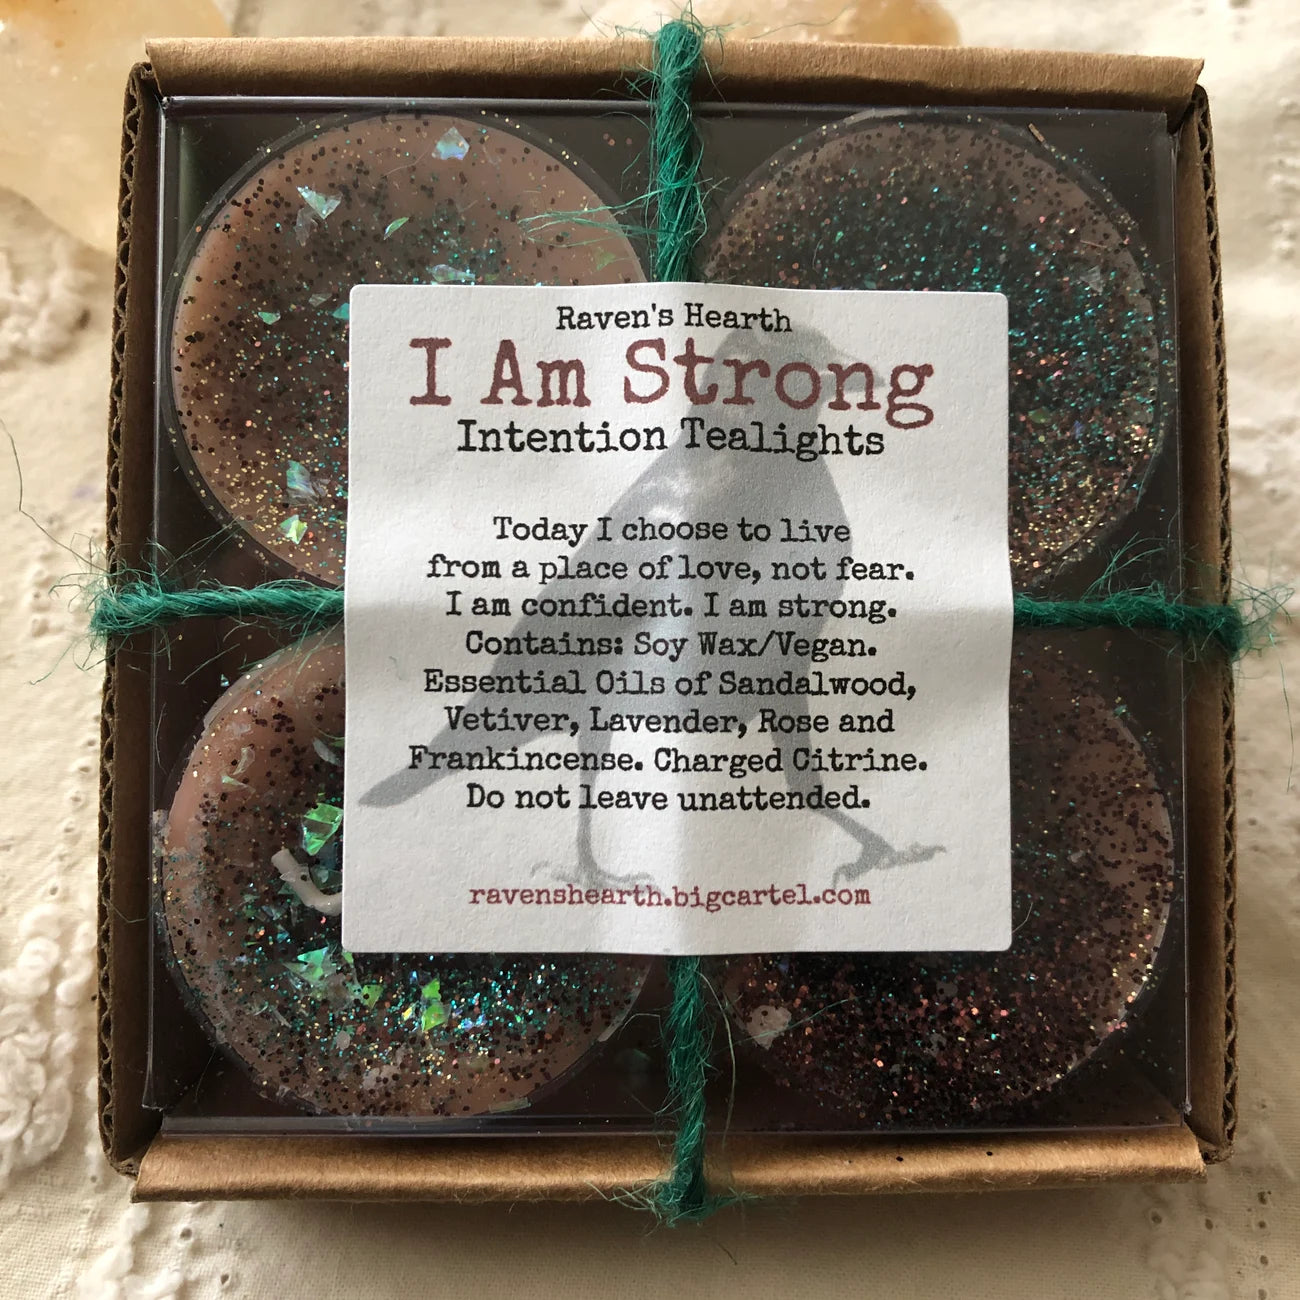 I AM STRONG Meditation Tealight Candles by Raven’s Hearth